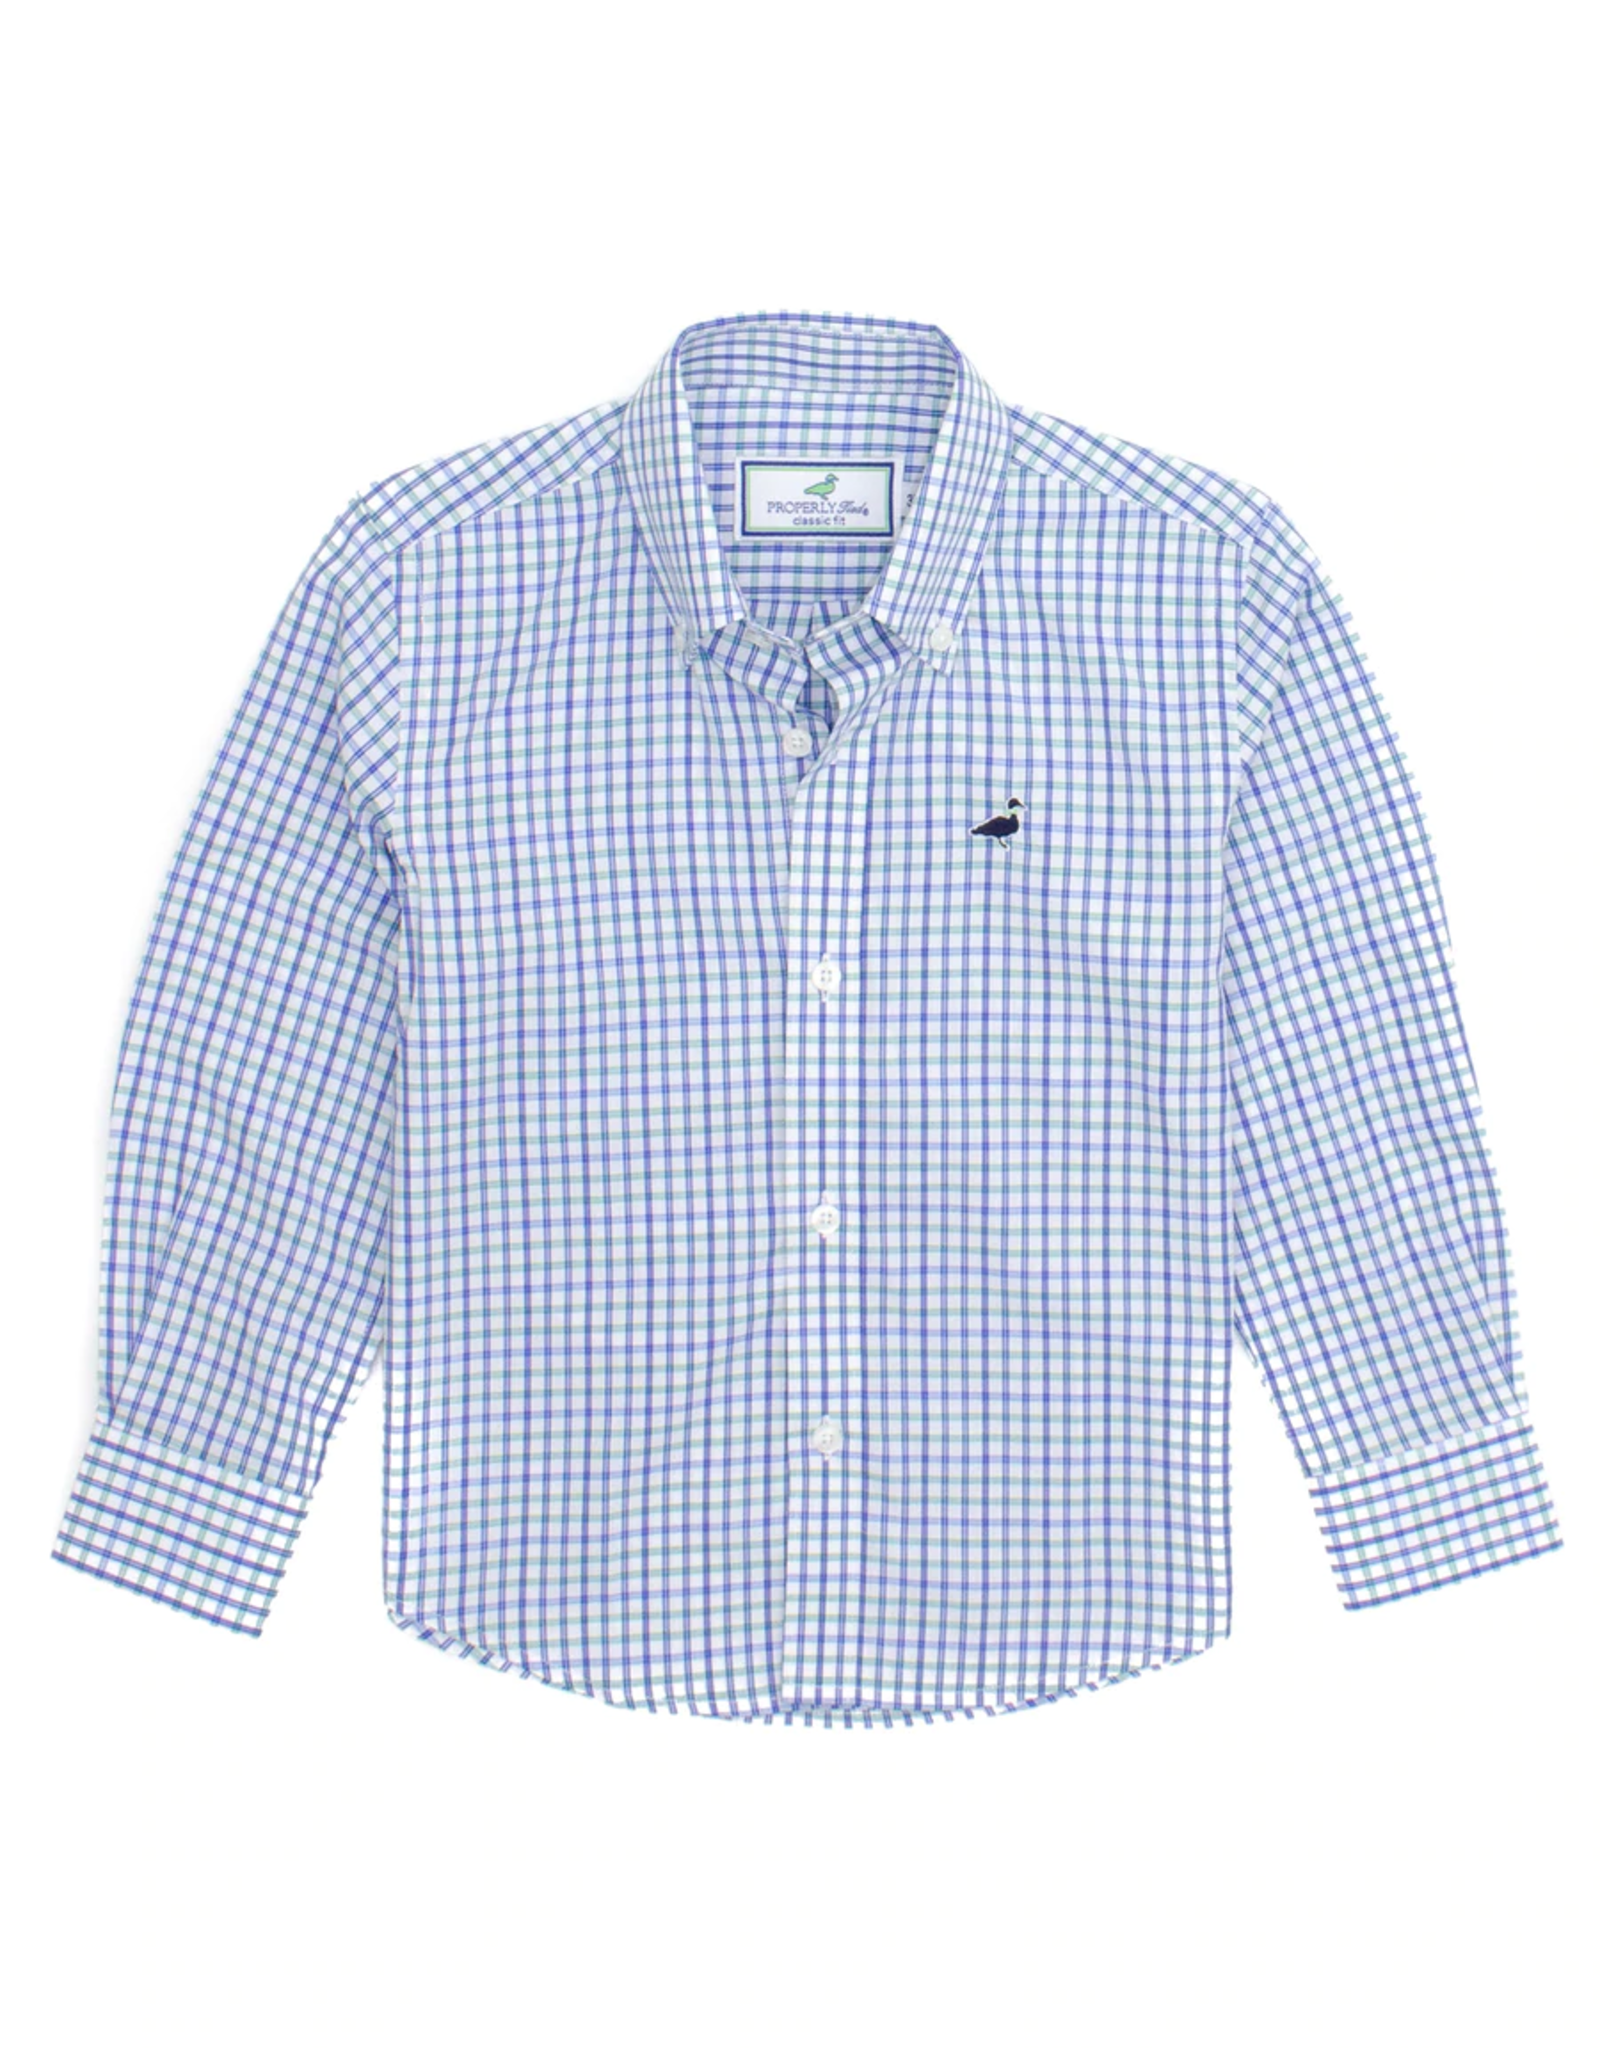 Properly Tied Seasonal Sportshirt Outer Banks